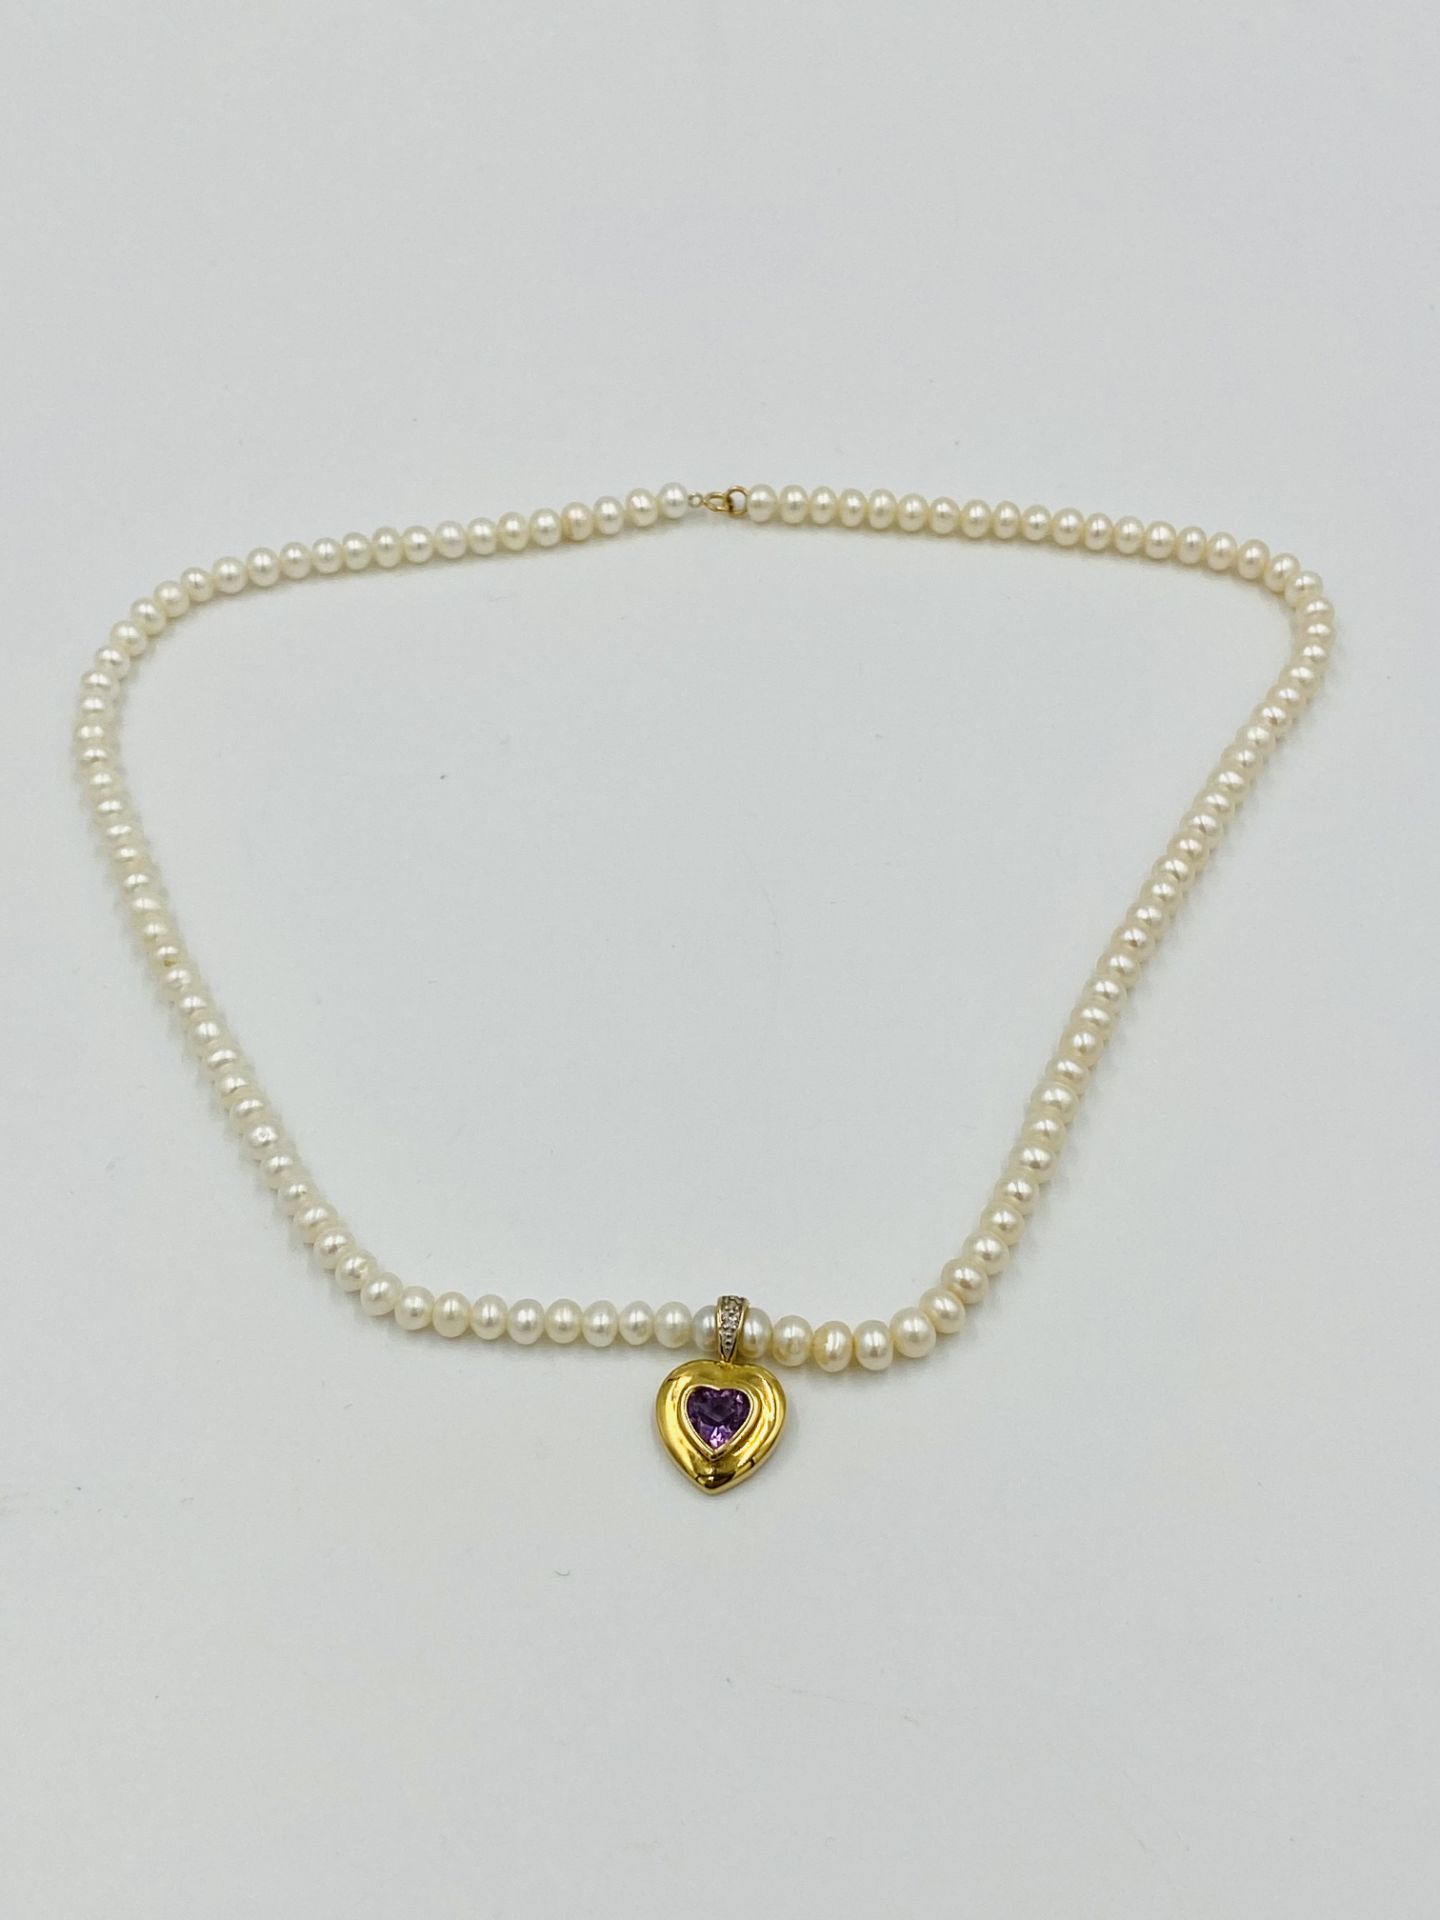 Pearl necklace with 14ct gold and amethyst pendant and 14ct gold clasp